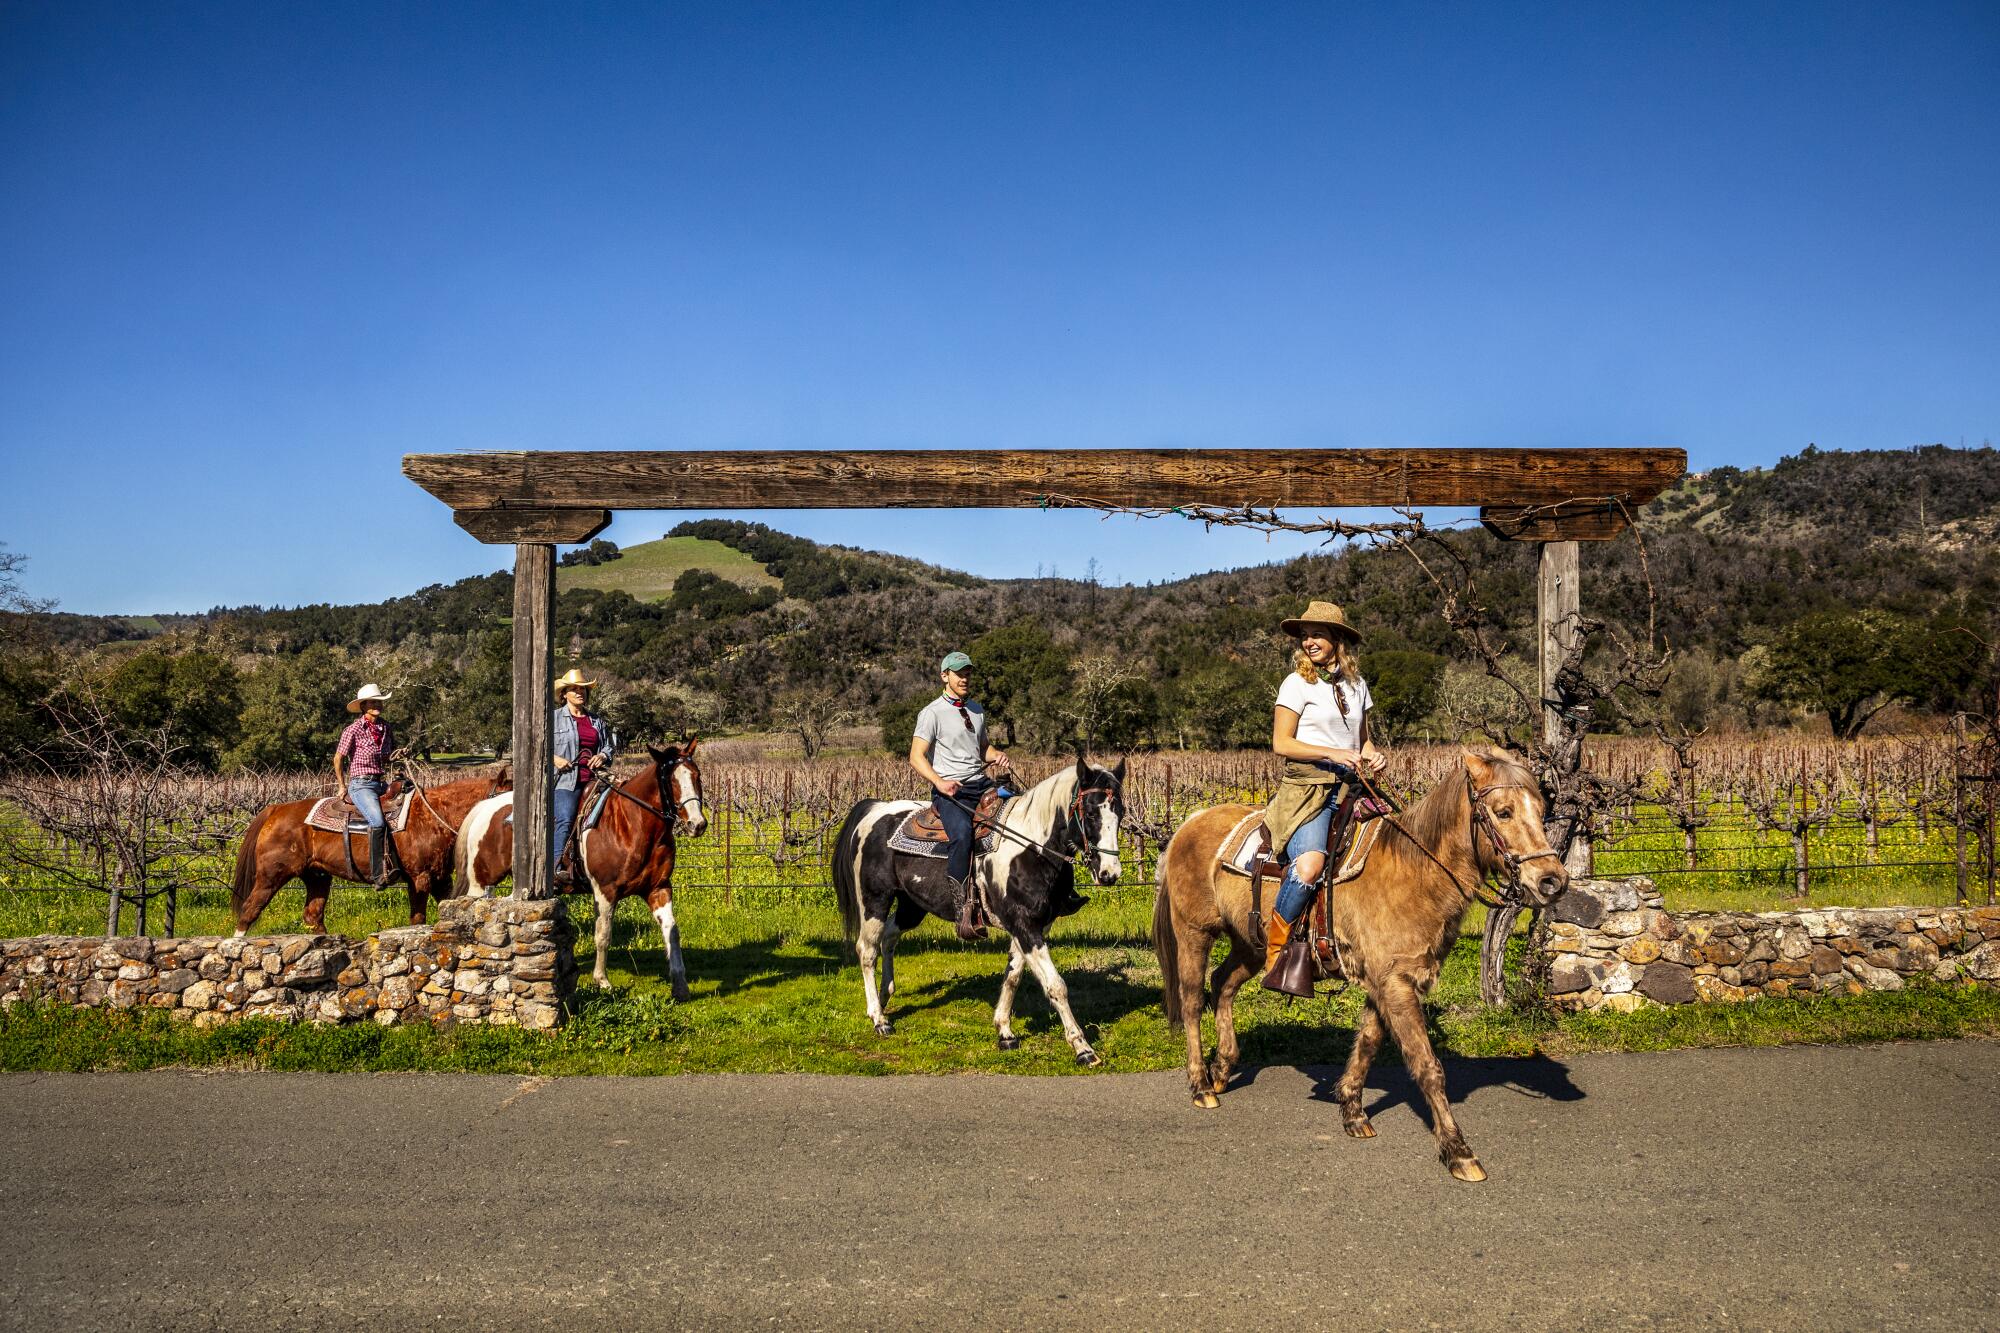 Four people ride horses under a wooden gate with vineyards in the background.